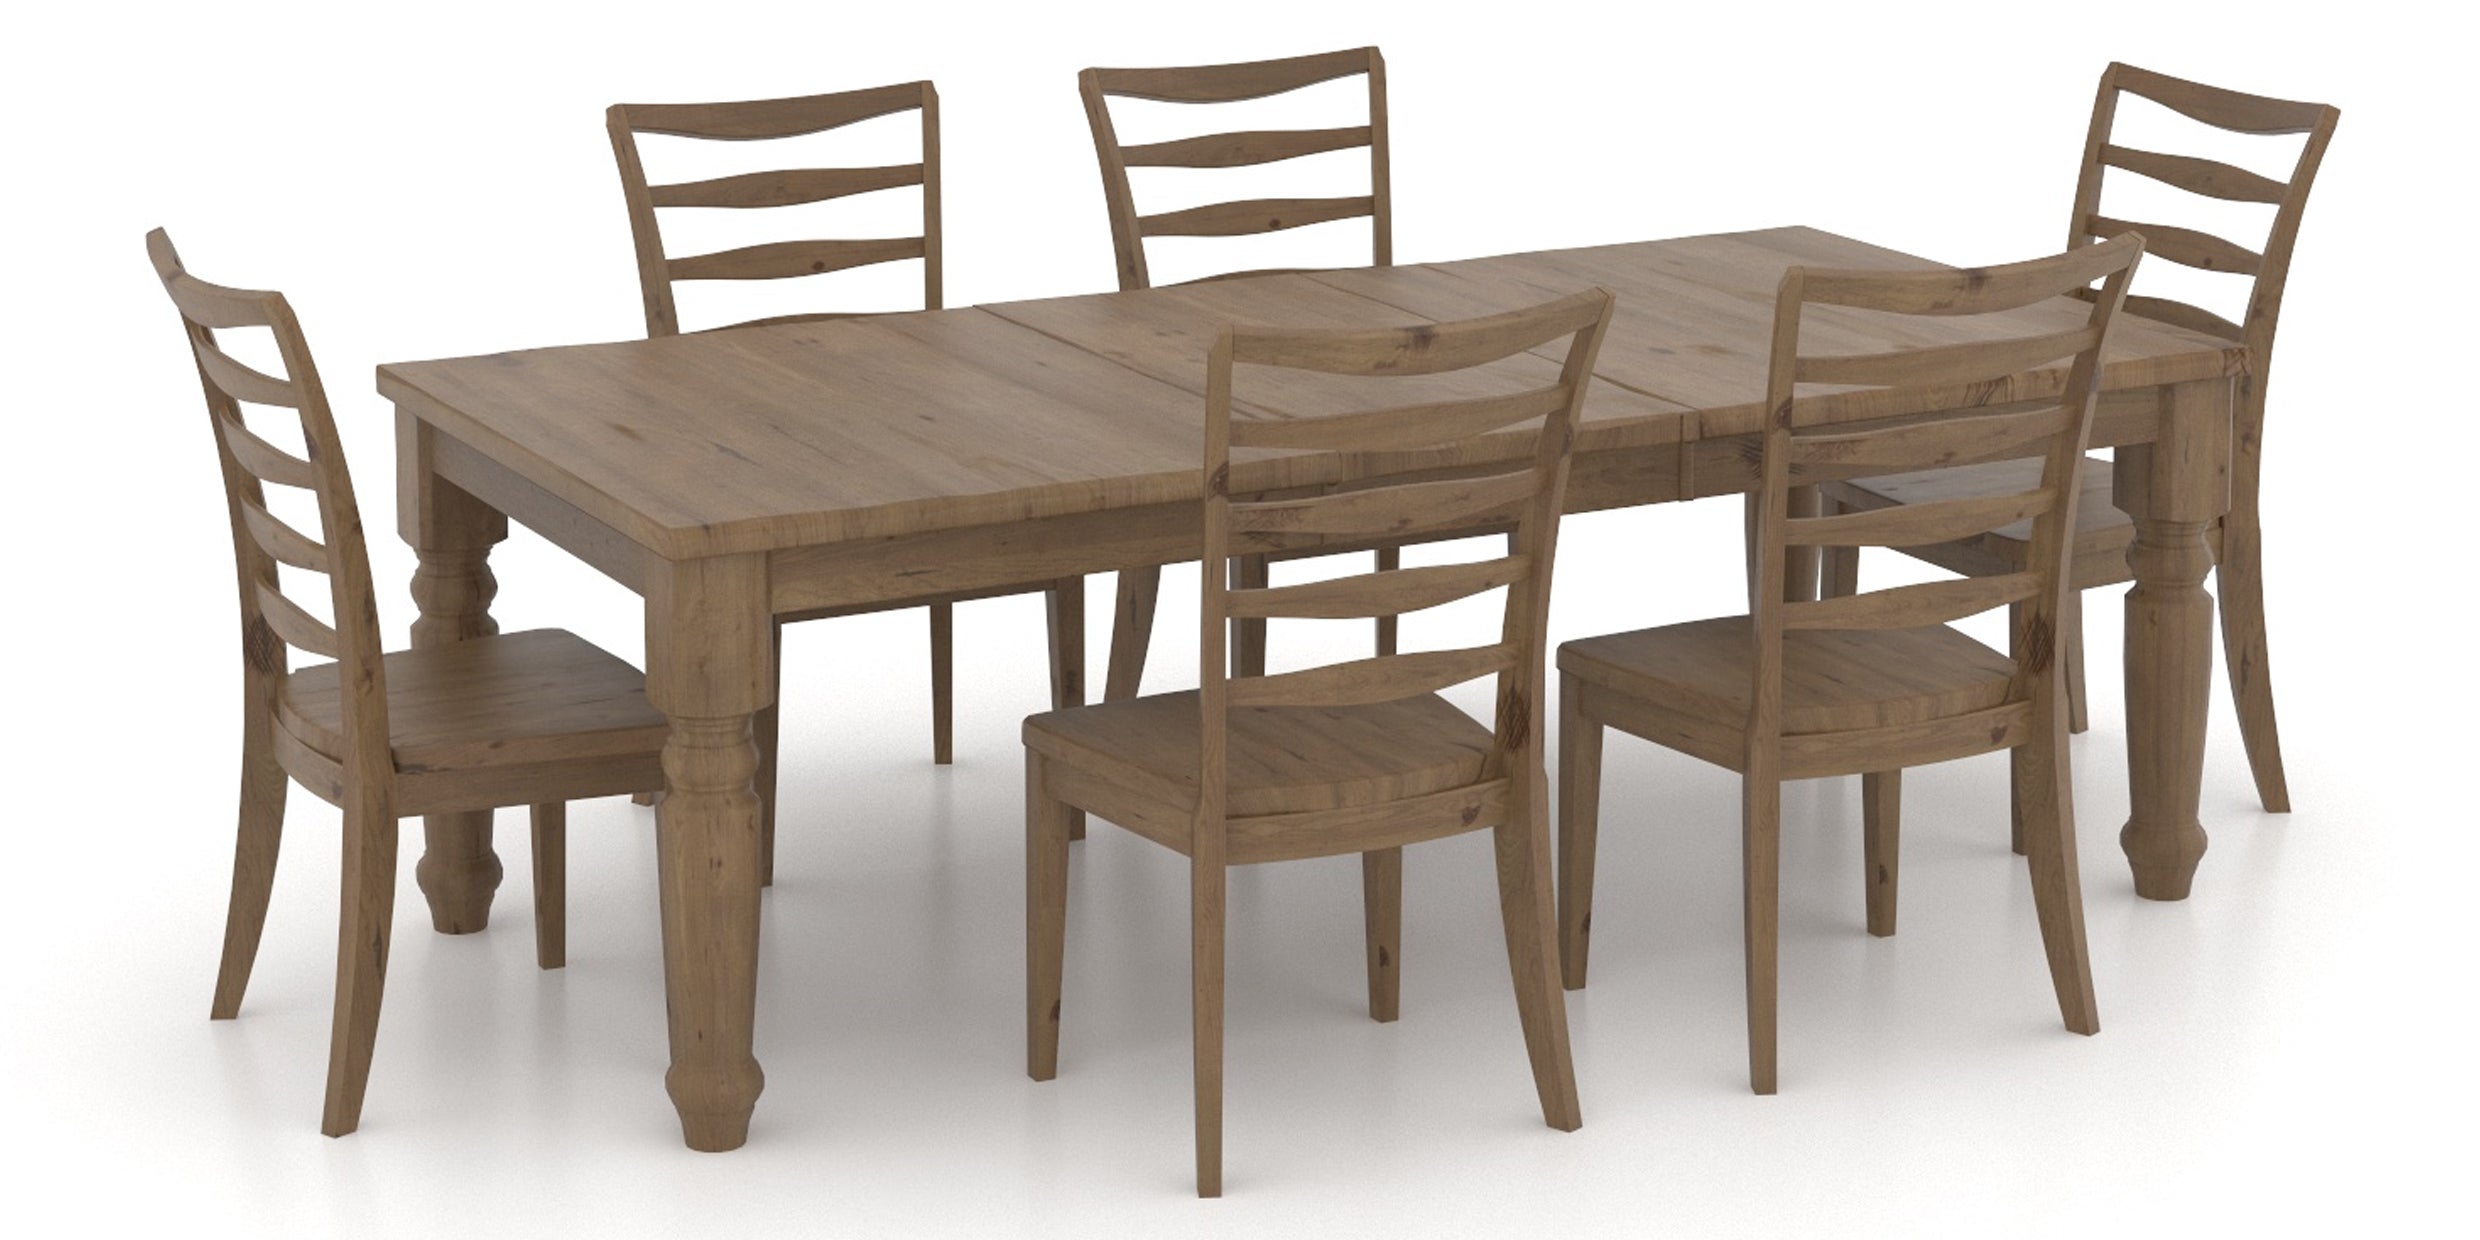 Pecan Washed Birch with Distressed Finish | Canadel Champlain 4268 Dining Set | Valley Ridge Furniture